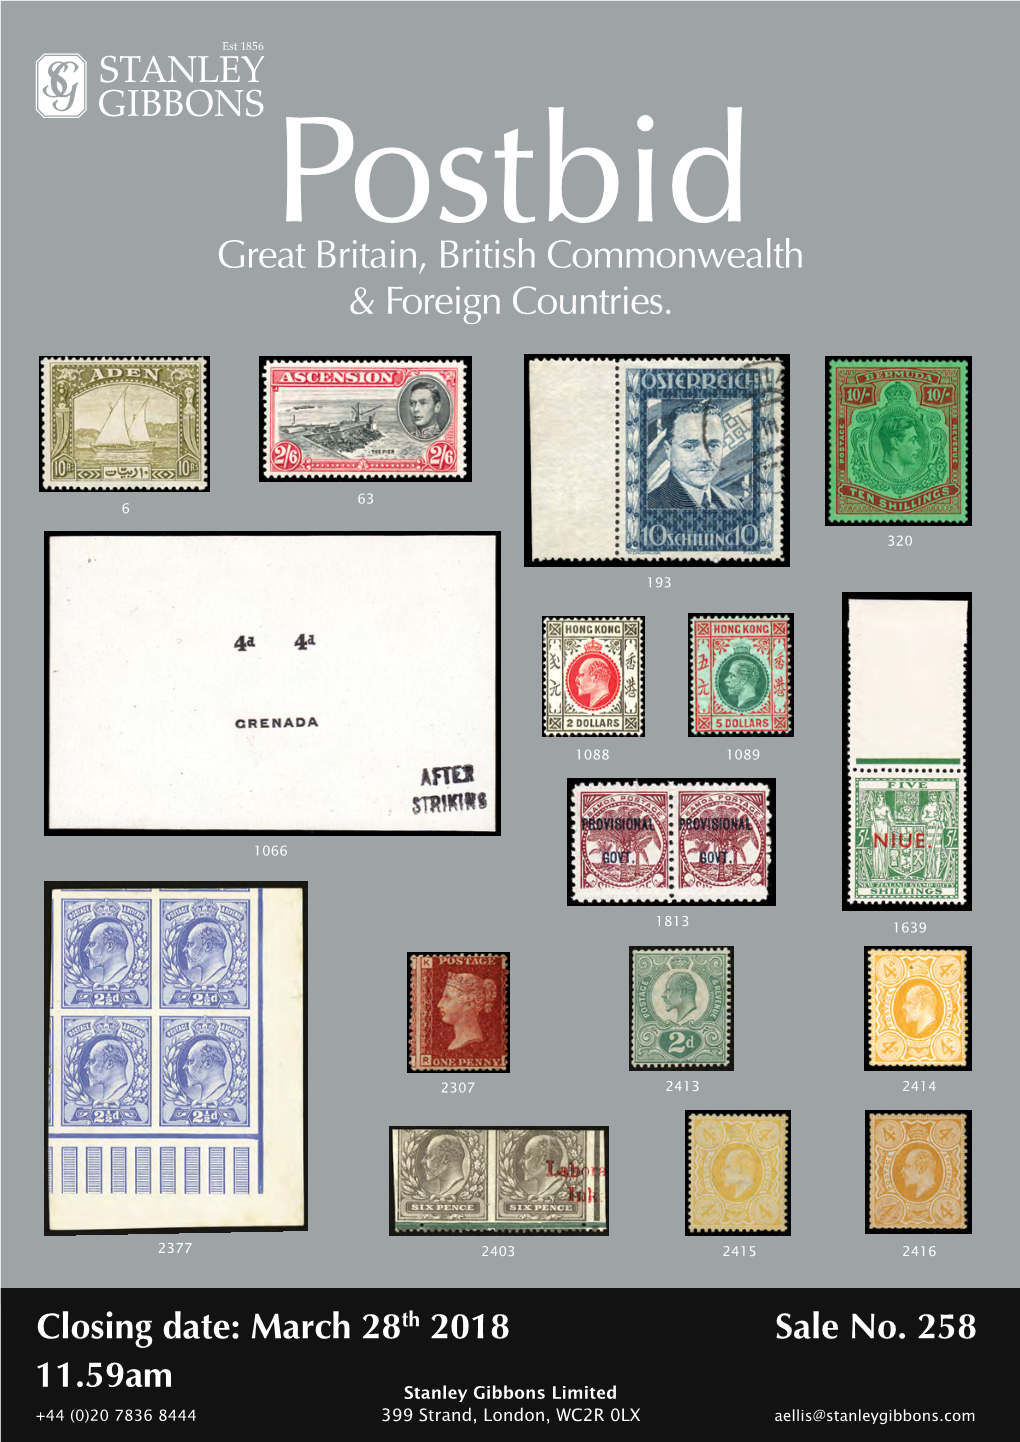 Great Britain, British Commonwealth & Foreign Countries